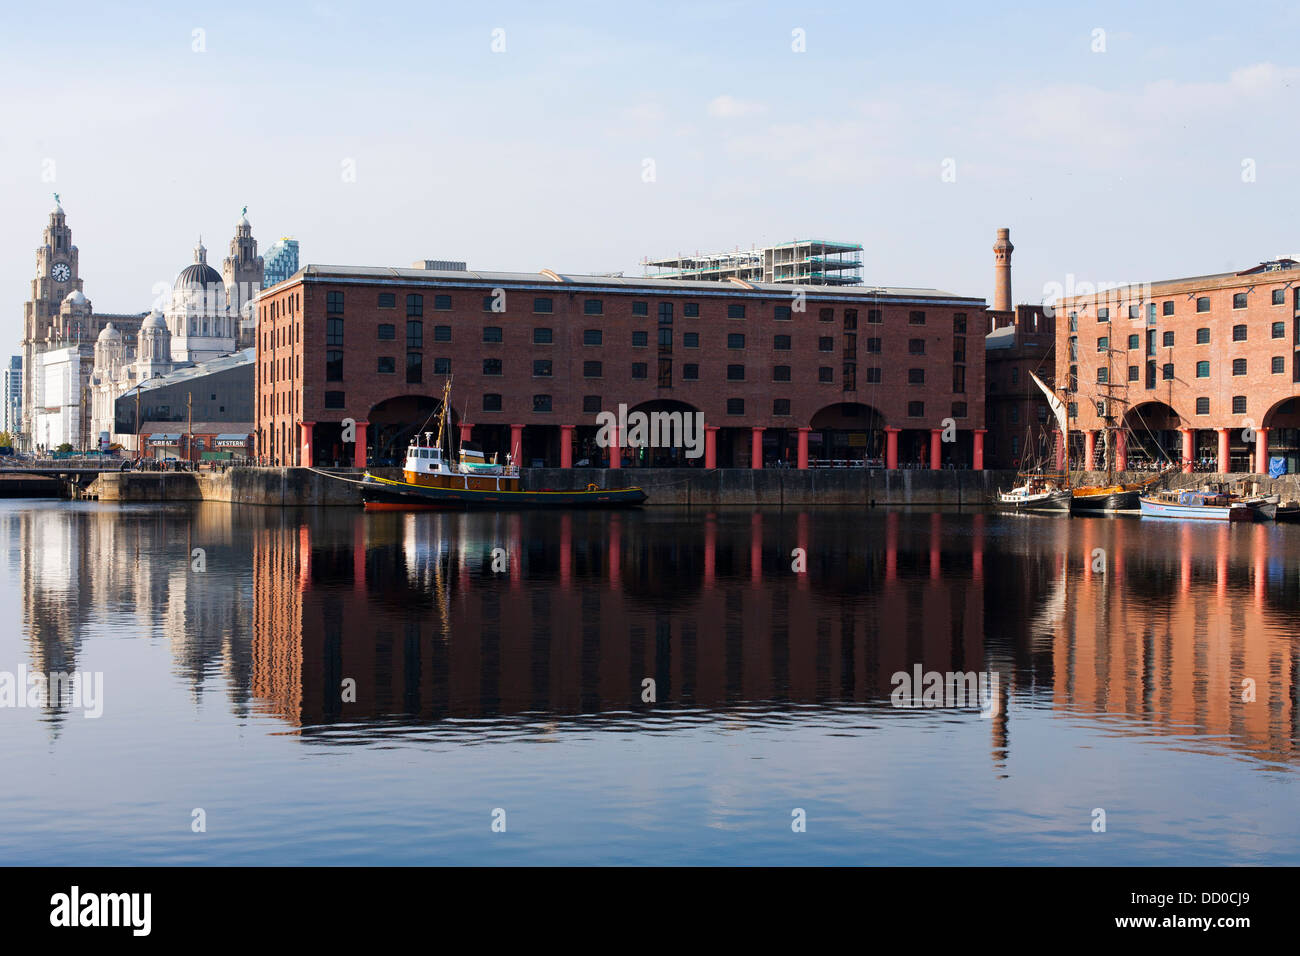 Buildings that make up part of the Albert Dock in Liverpool port and harbor reflect in the water Stock Photo